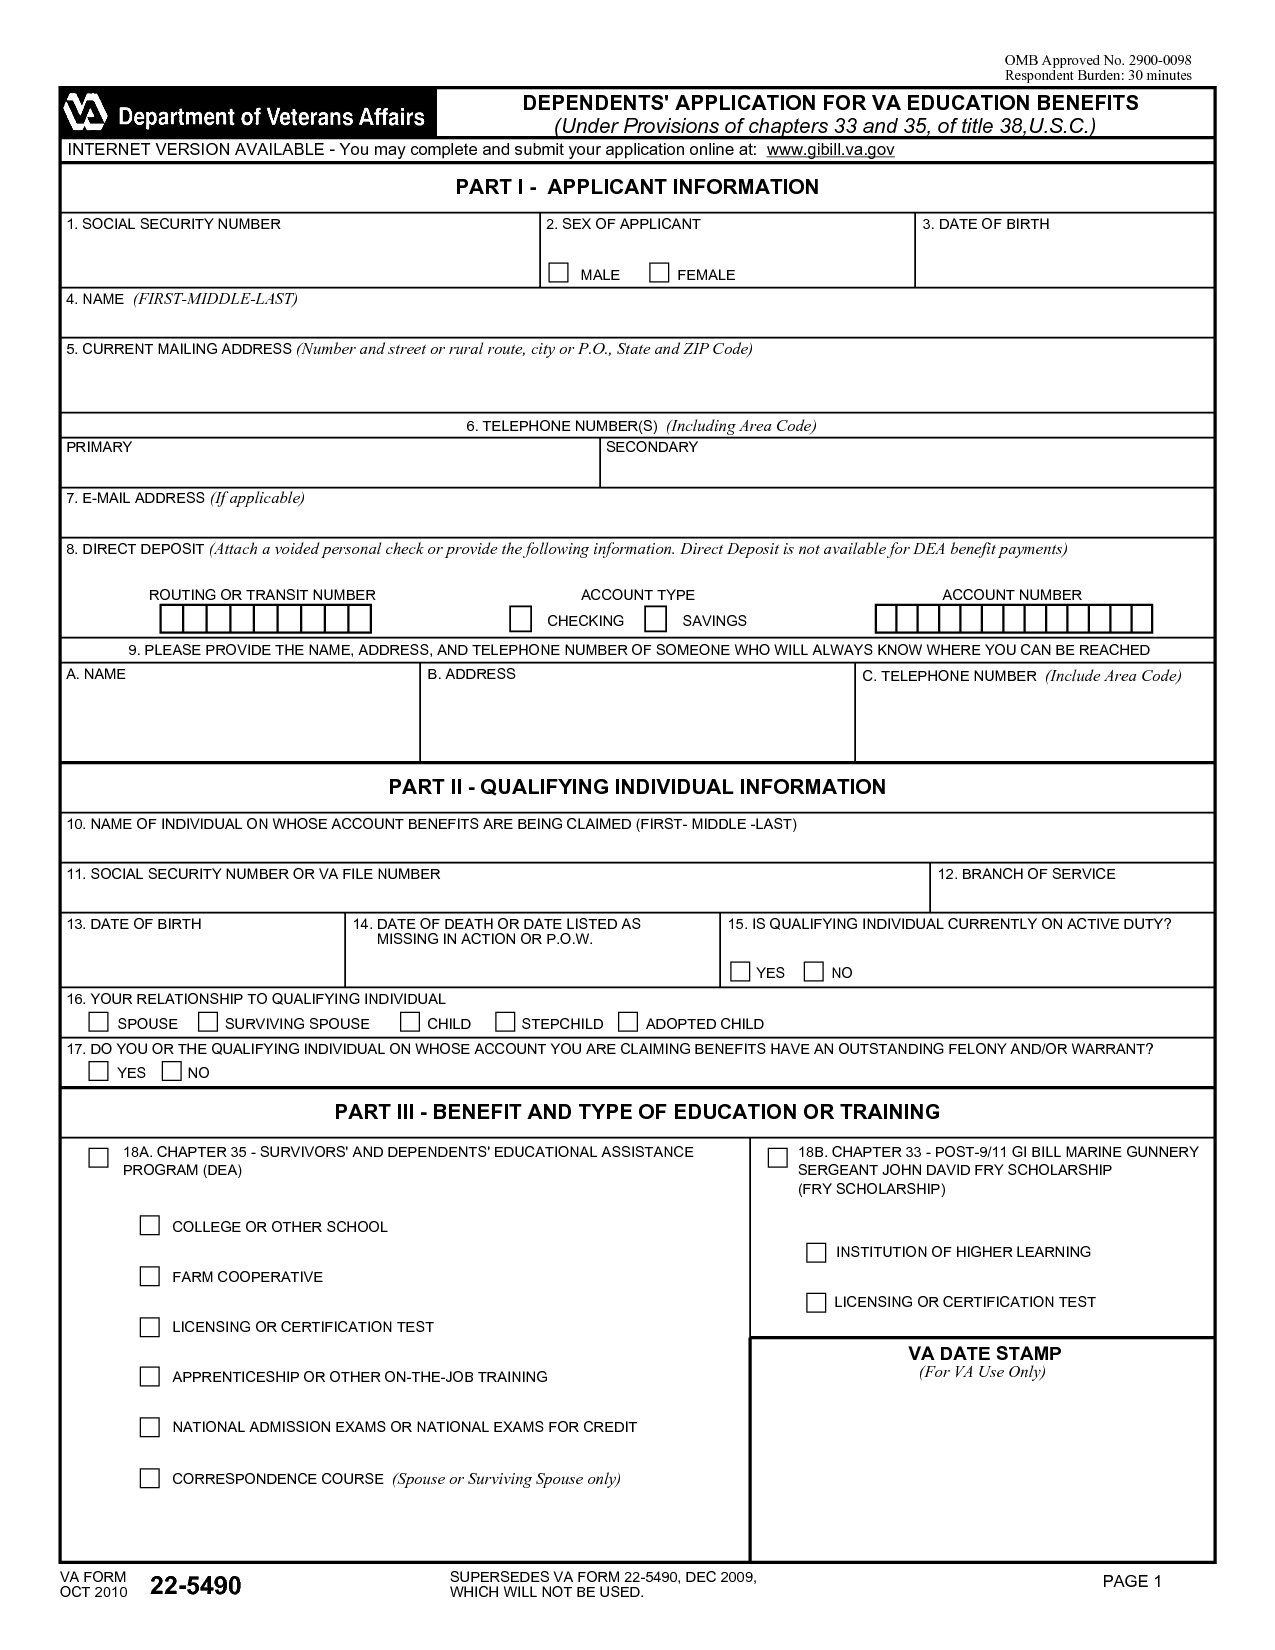 Fake Marriage License Template Salescv Throughout Fake Business License Template